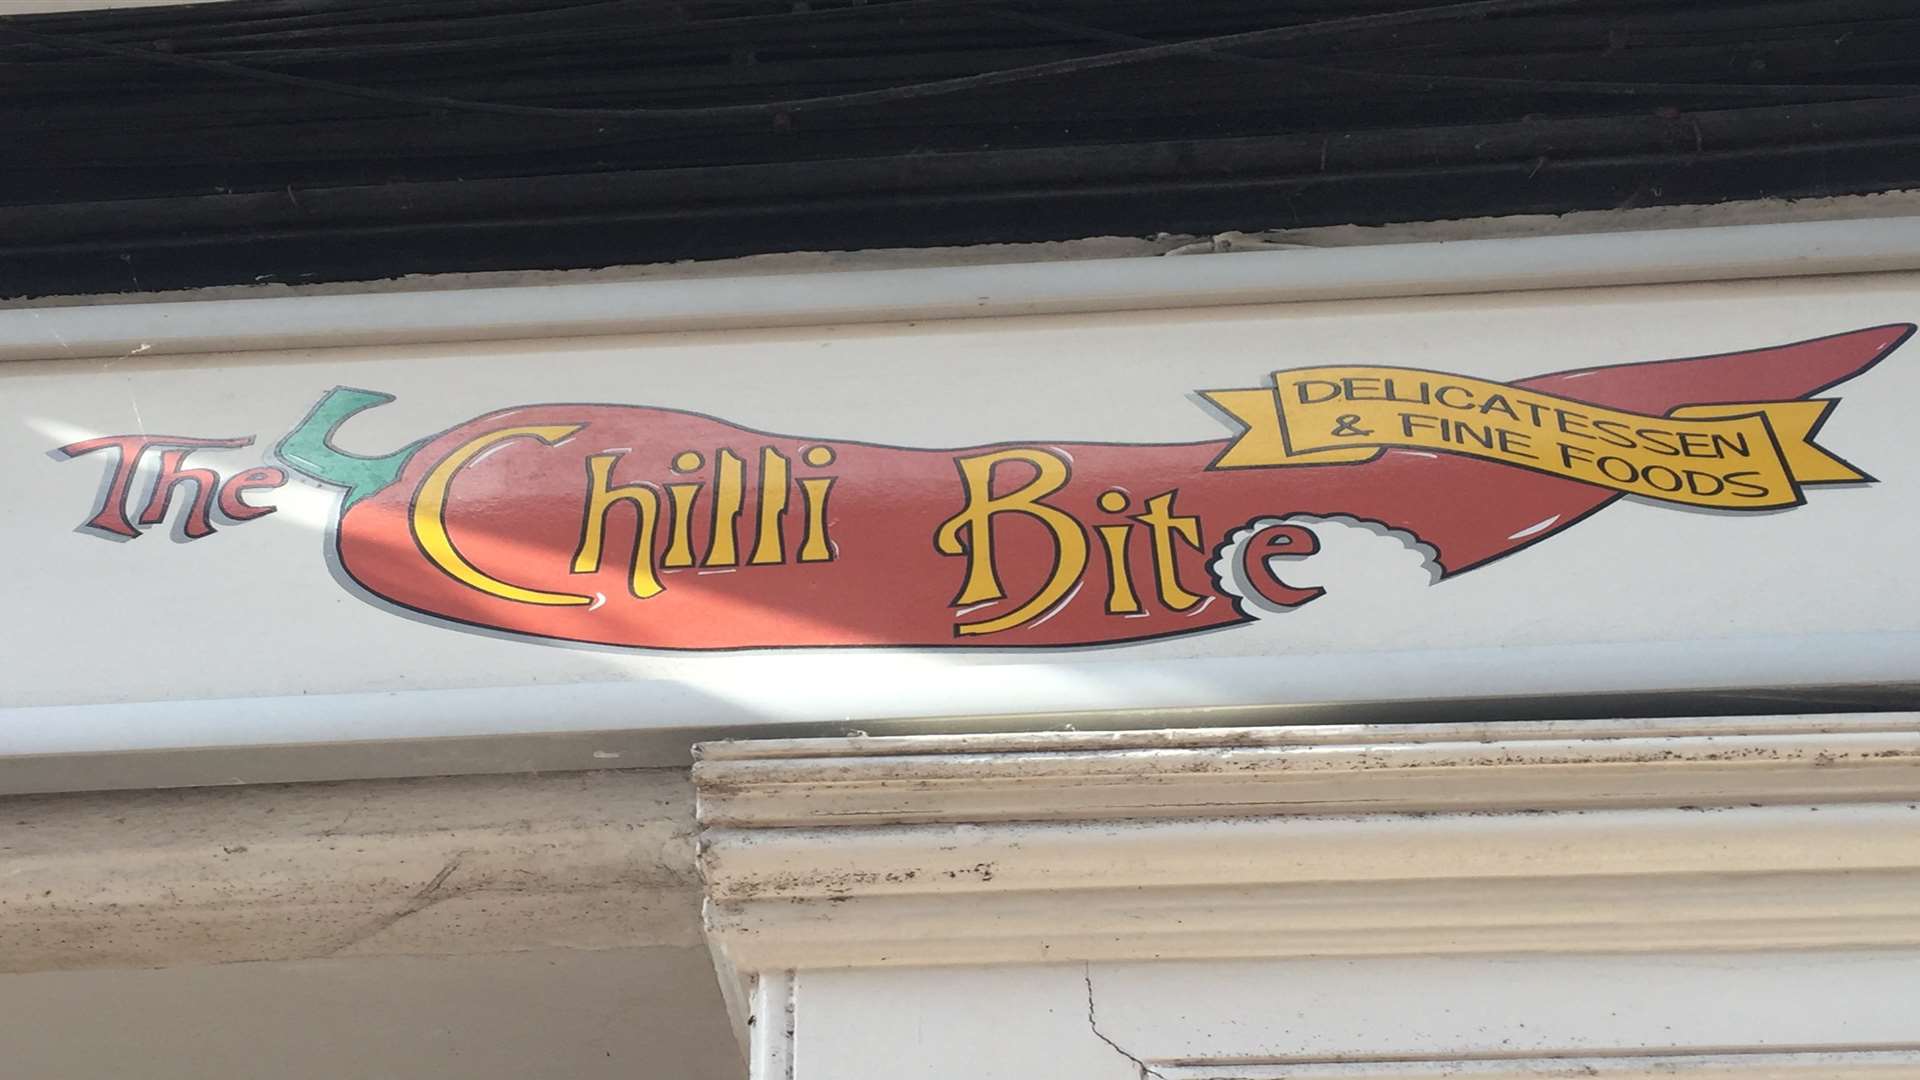 The Chilli Bite has been targeted